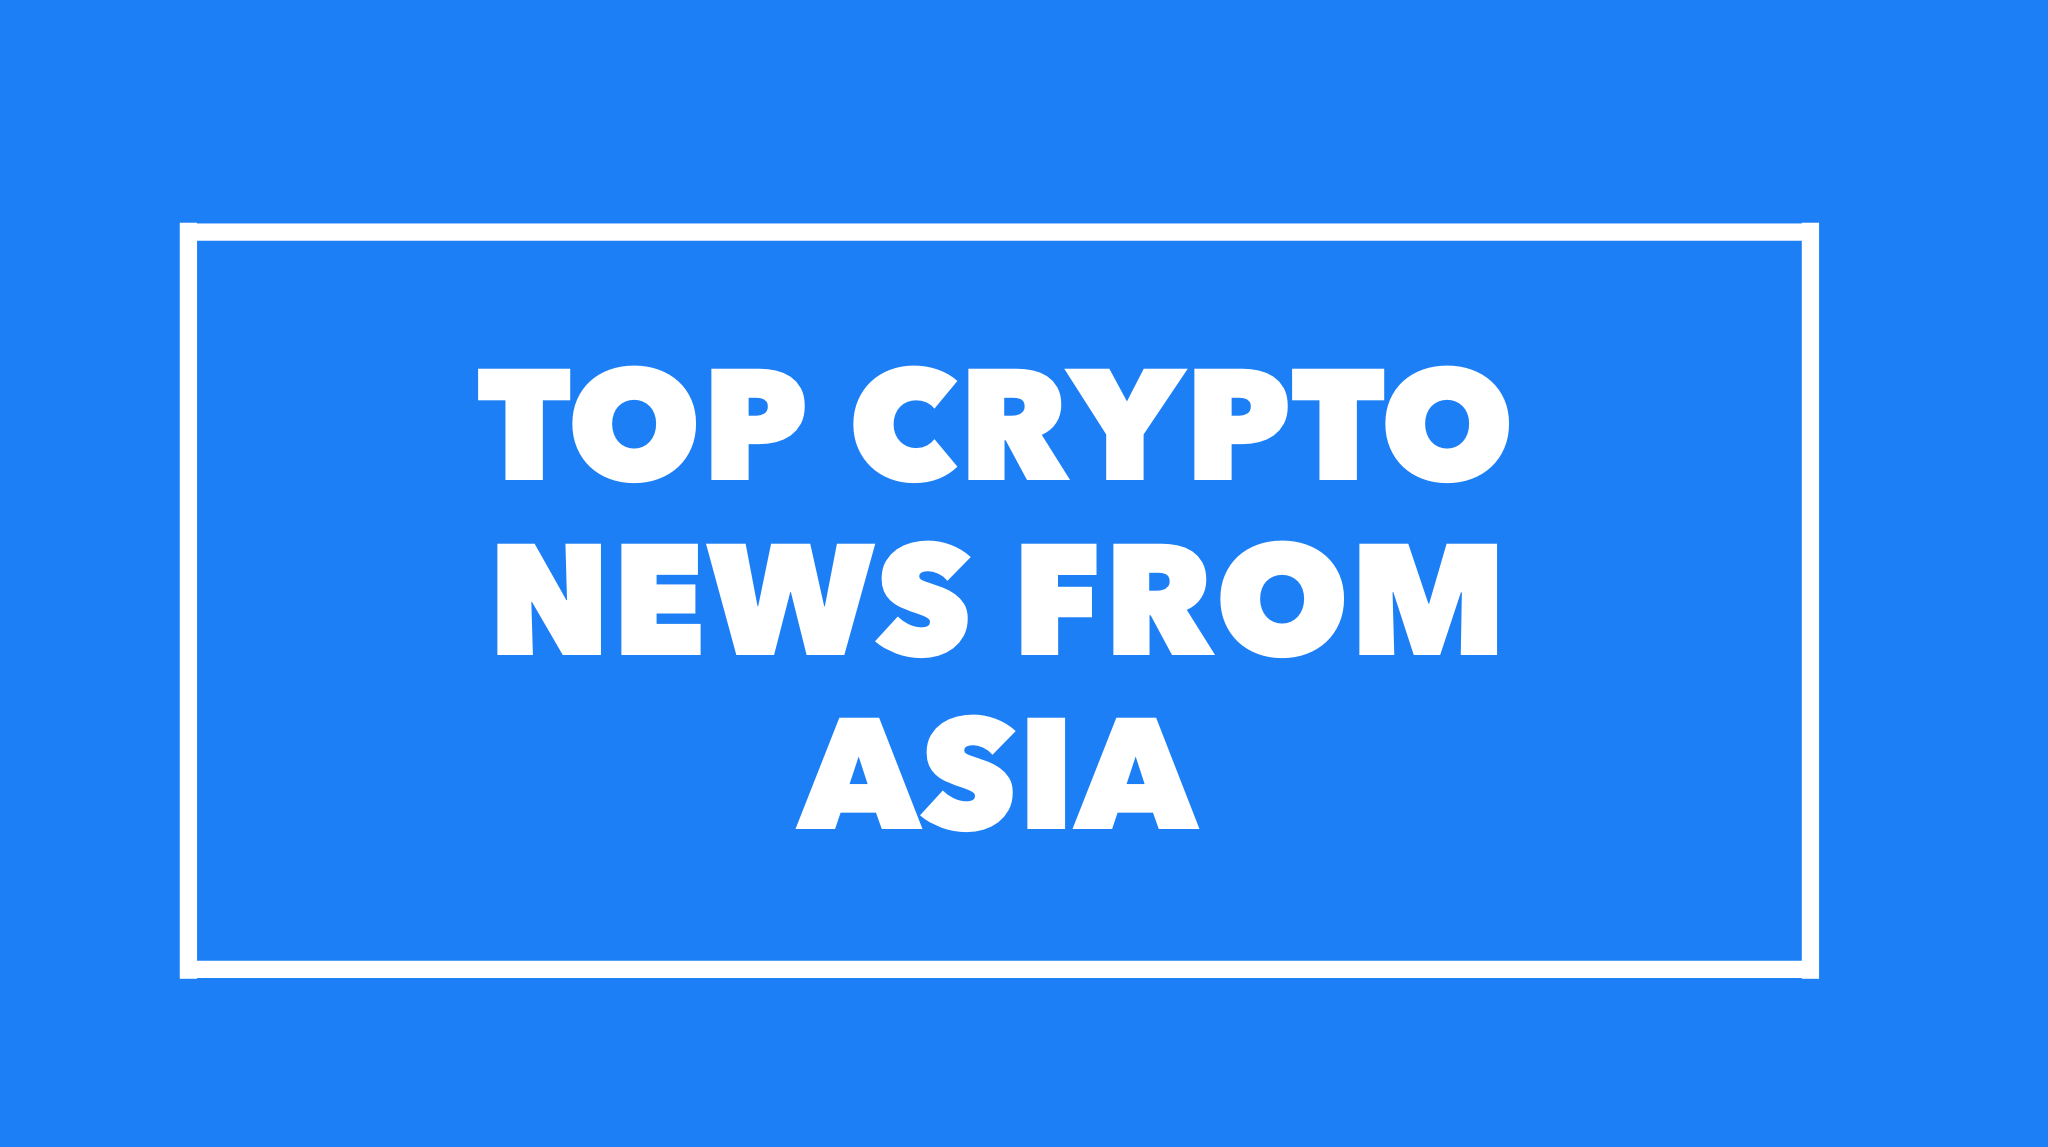 Top Crypto News in Asia: Sept 9- Sept 12